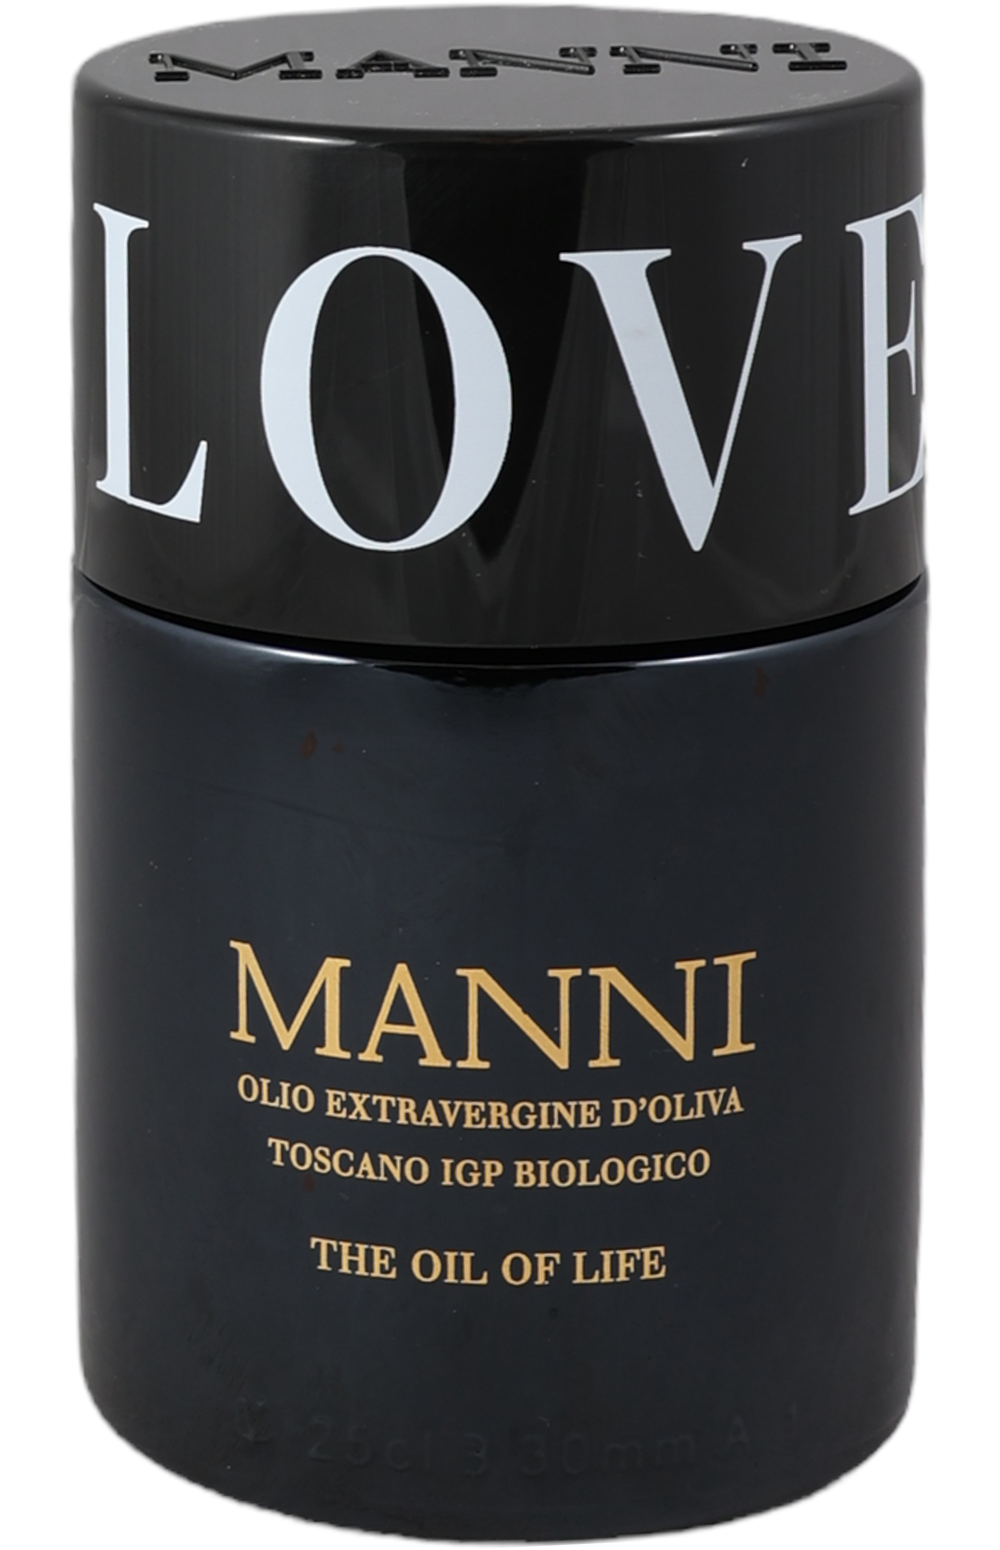 Manni-The Oil of Life